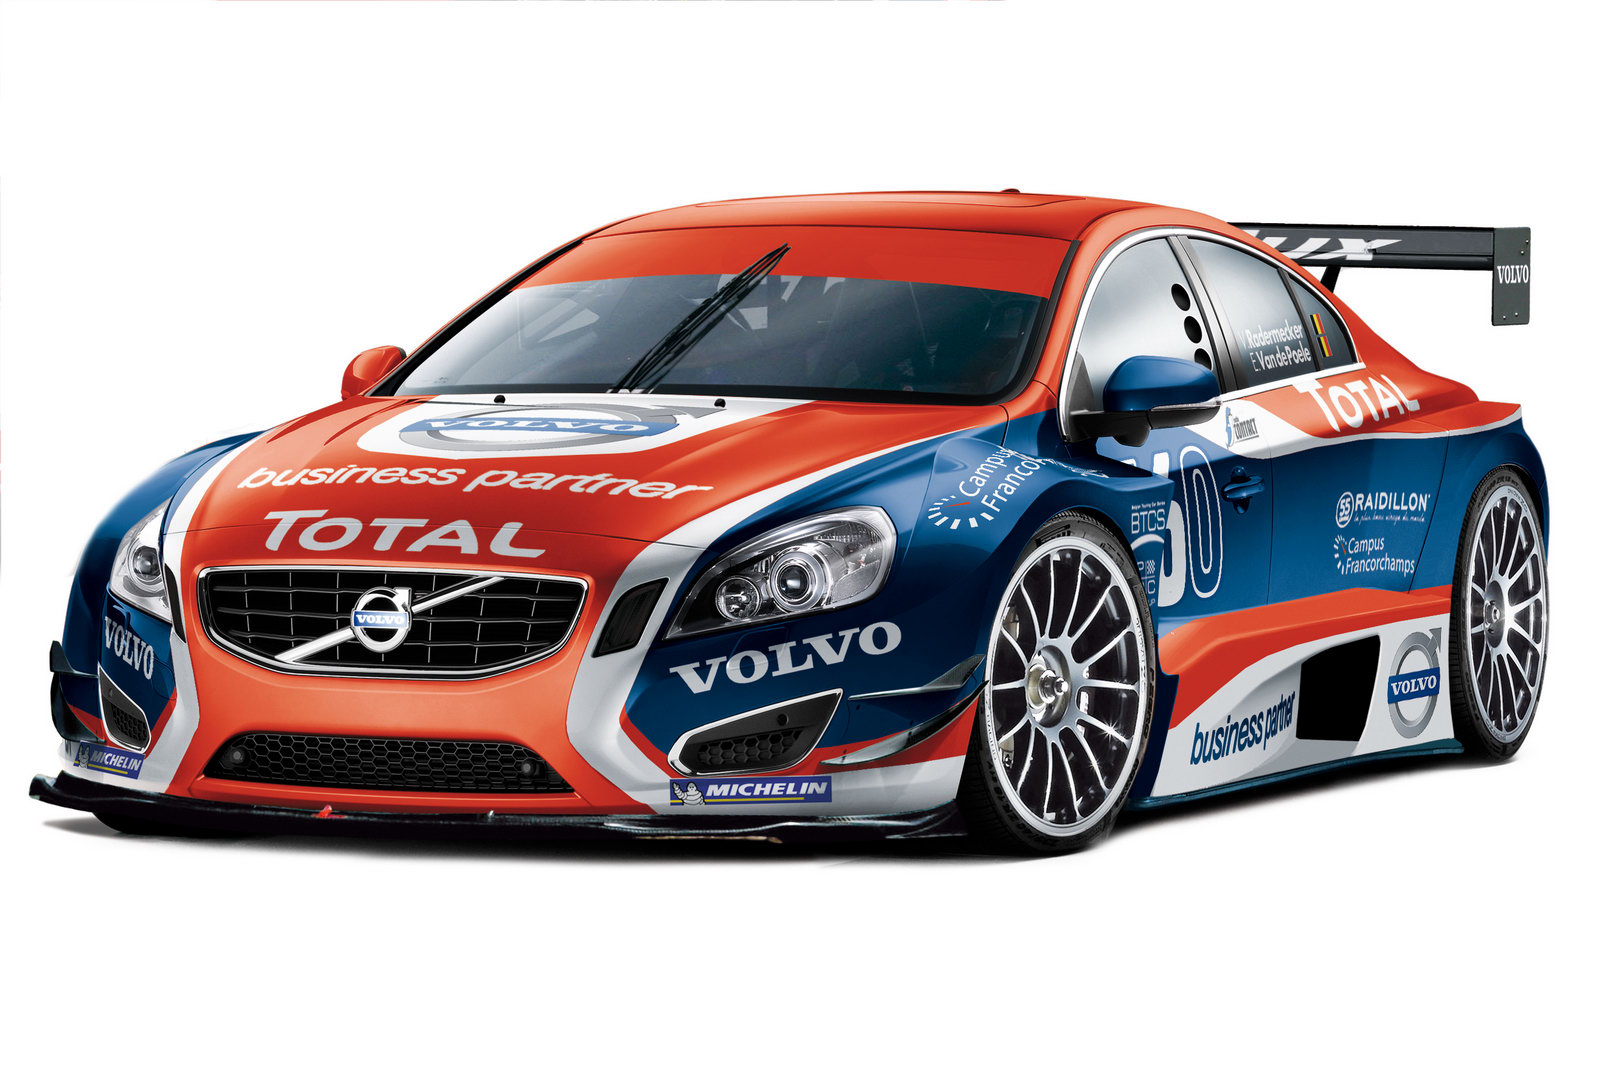 Racing Car Image HD Wallpaper And Pictures